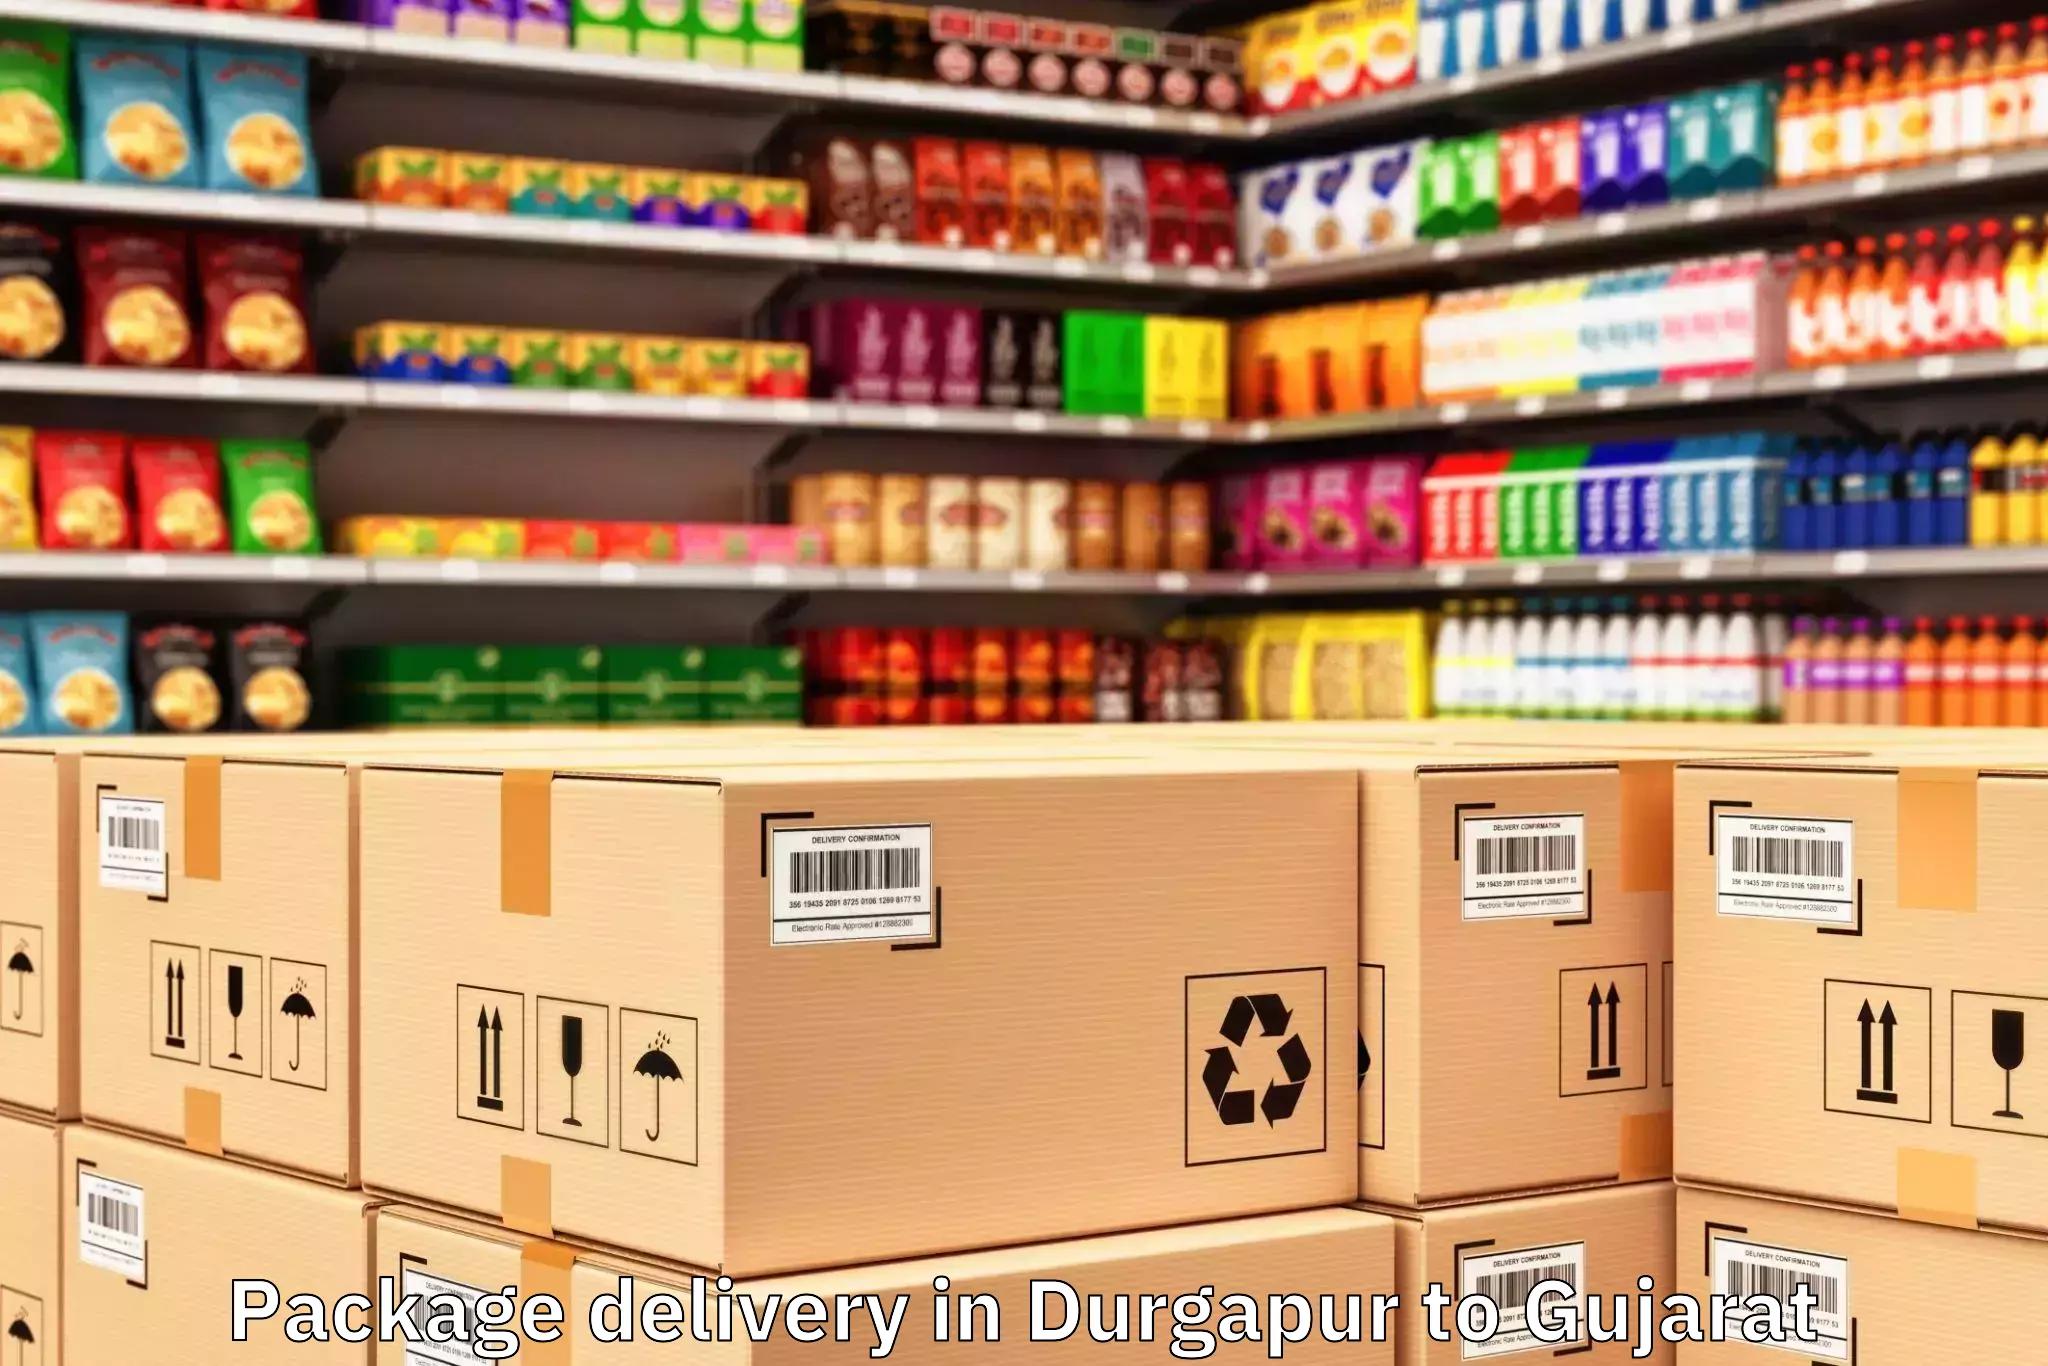 Quality Durgapur to Idar Package Delivery